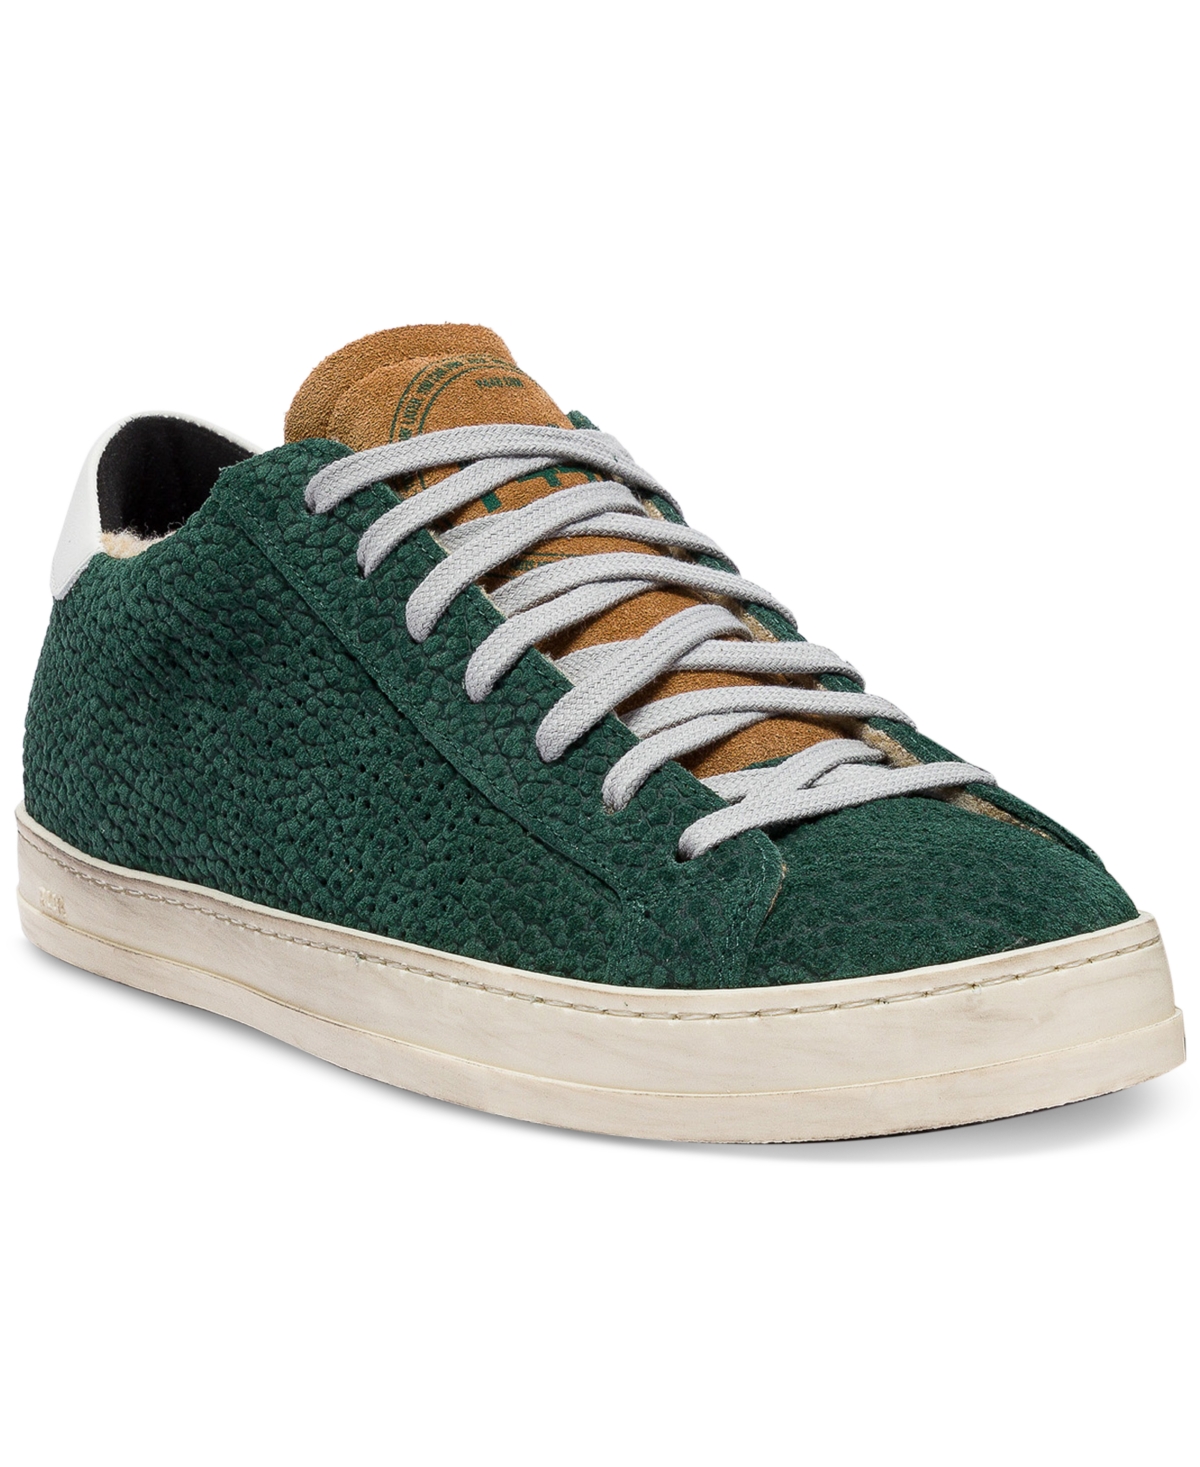 P448 Men's Textured Leather Sneakers In Timber